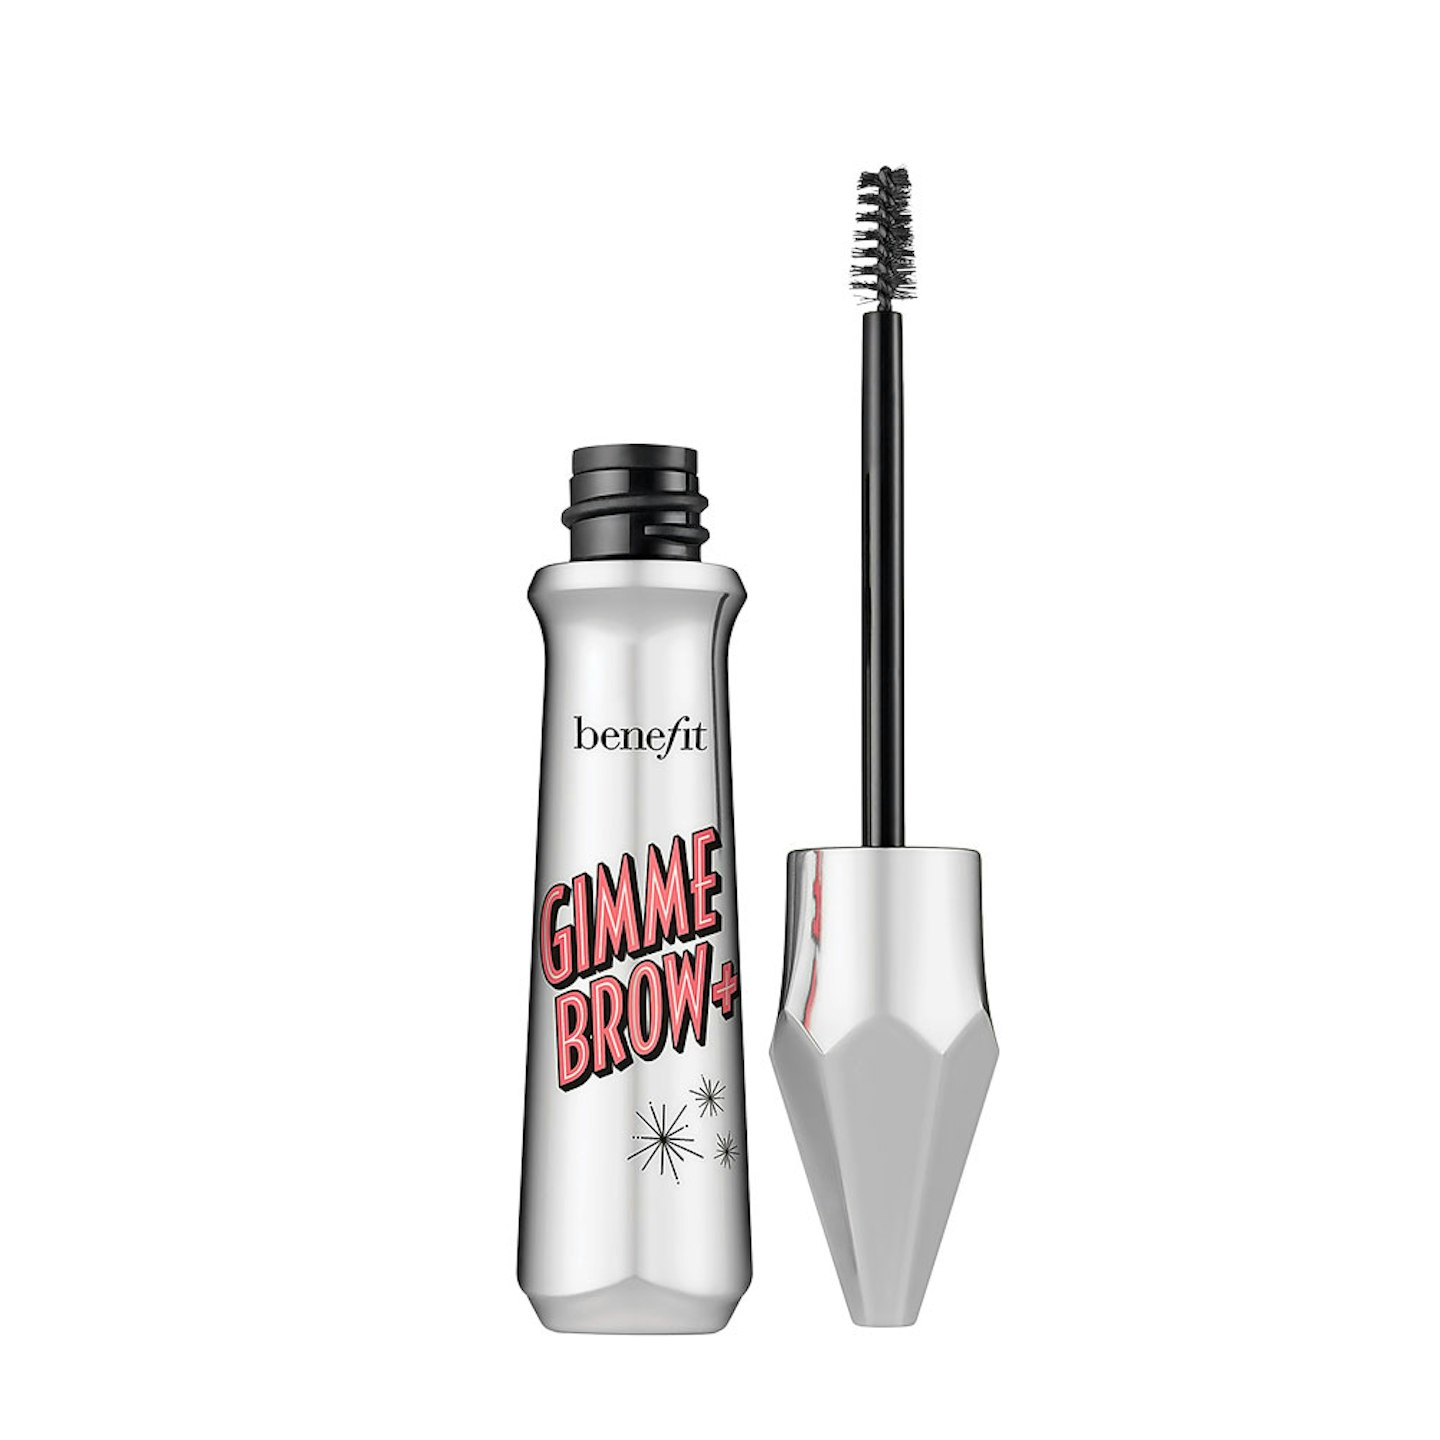 Benefit Gimme Brow+ Volumizing Eyebrow Gel, £20.50 from Boots